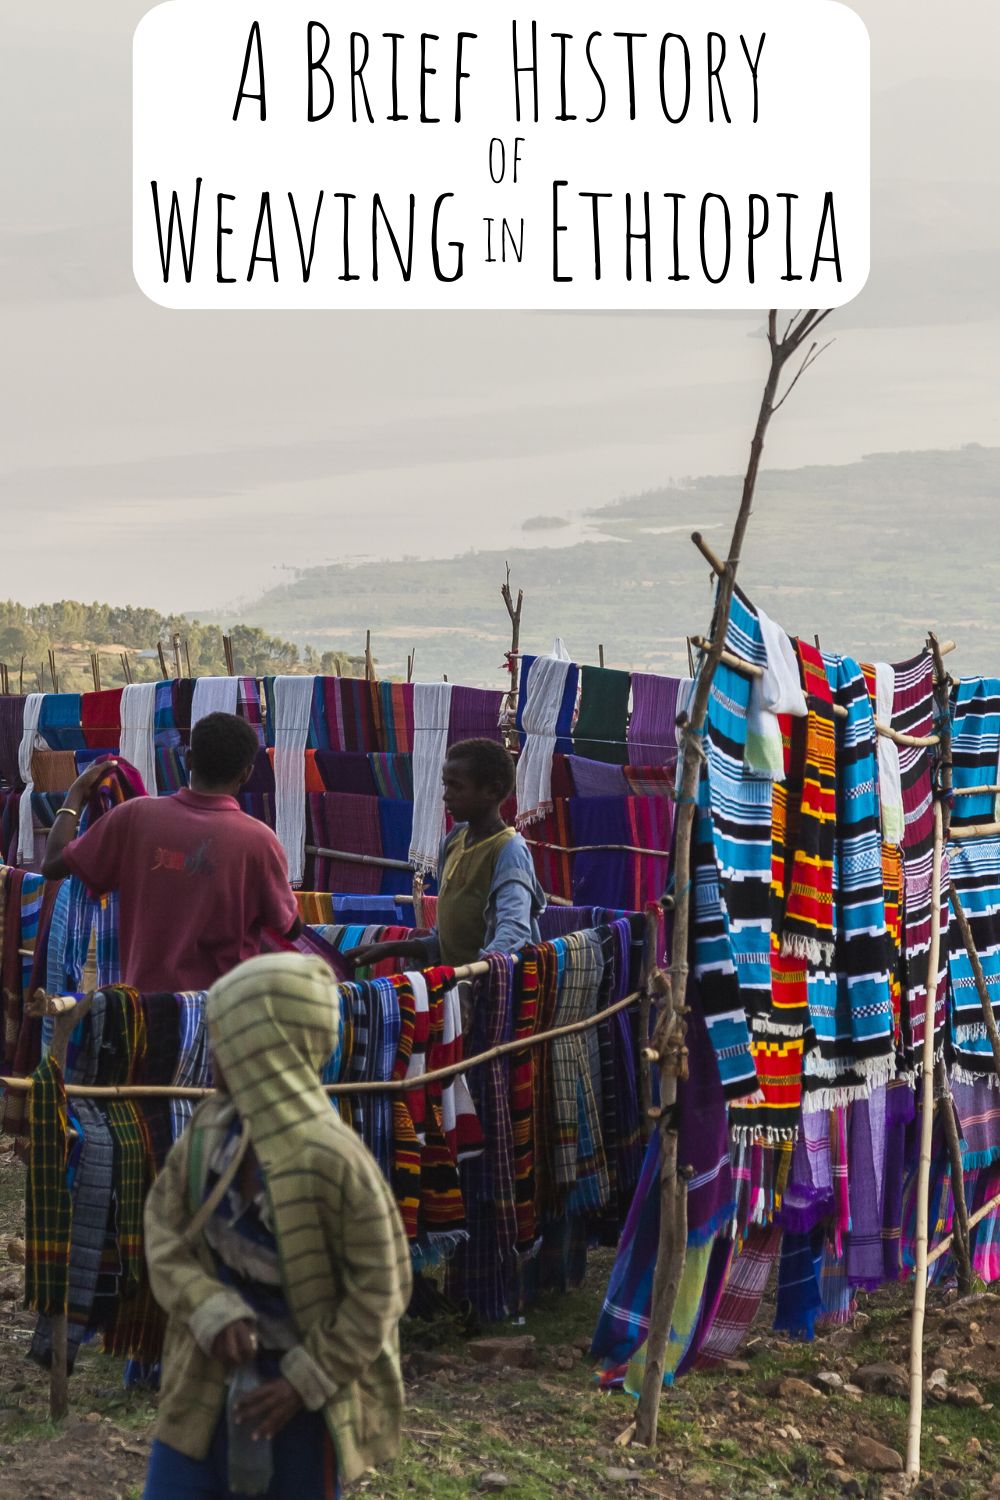 A Brief History of Weaving in Ethiopia